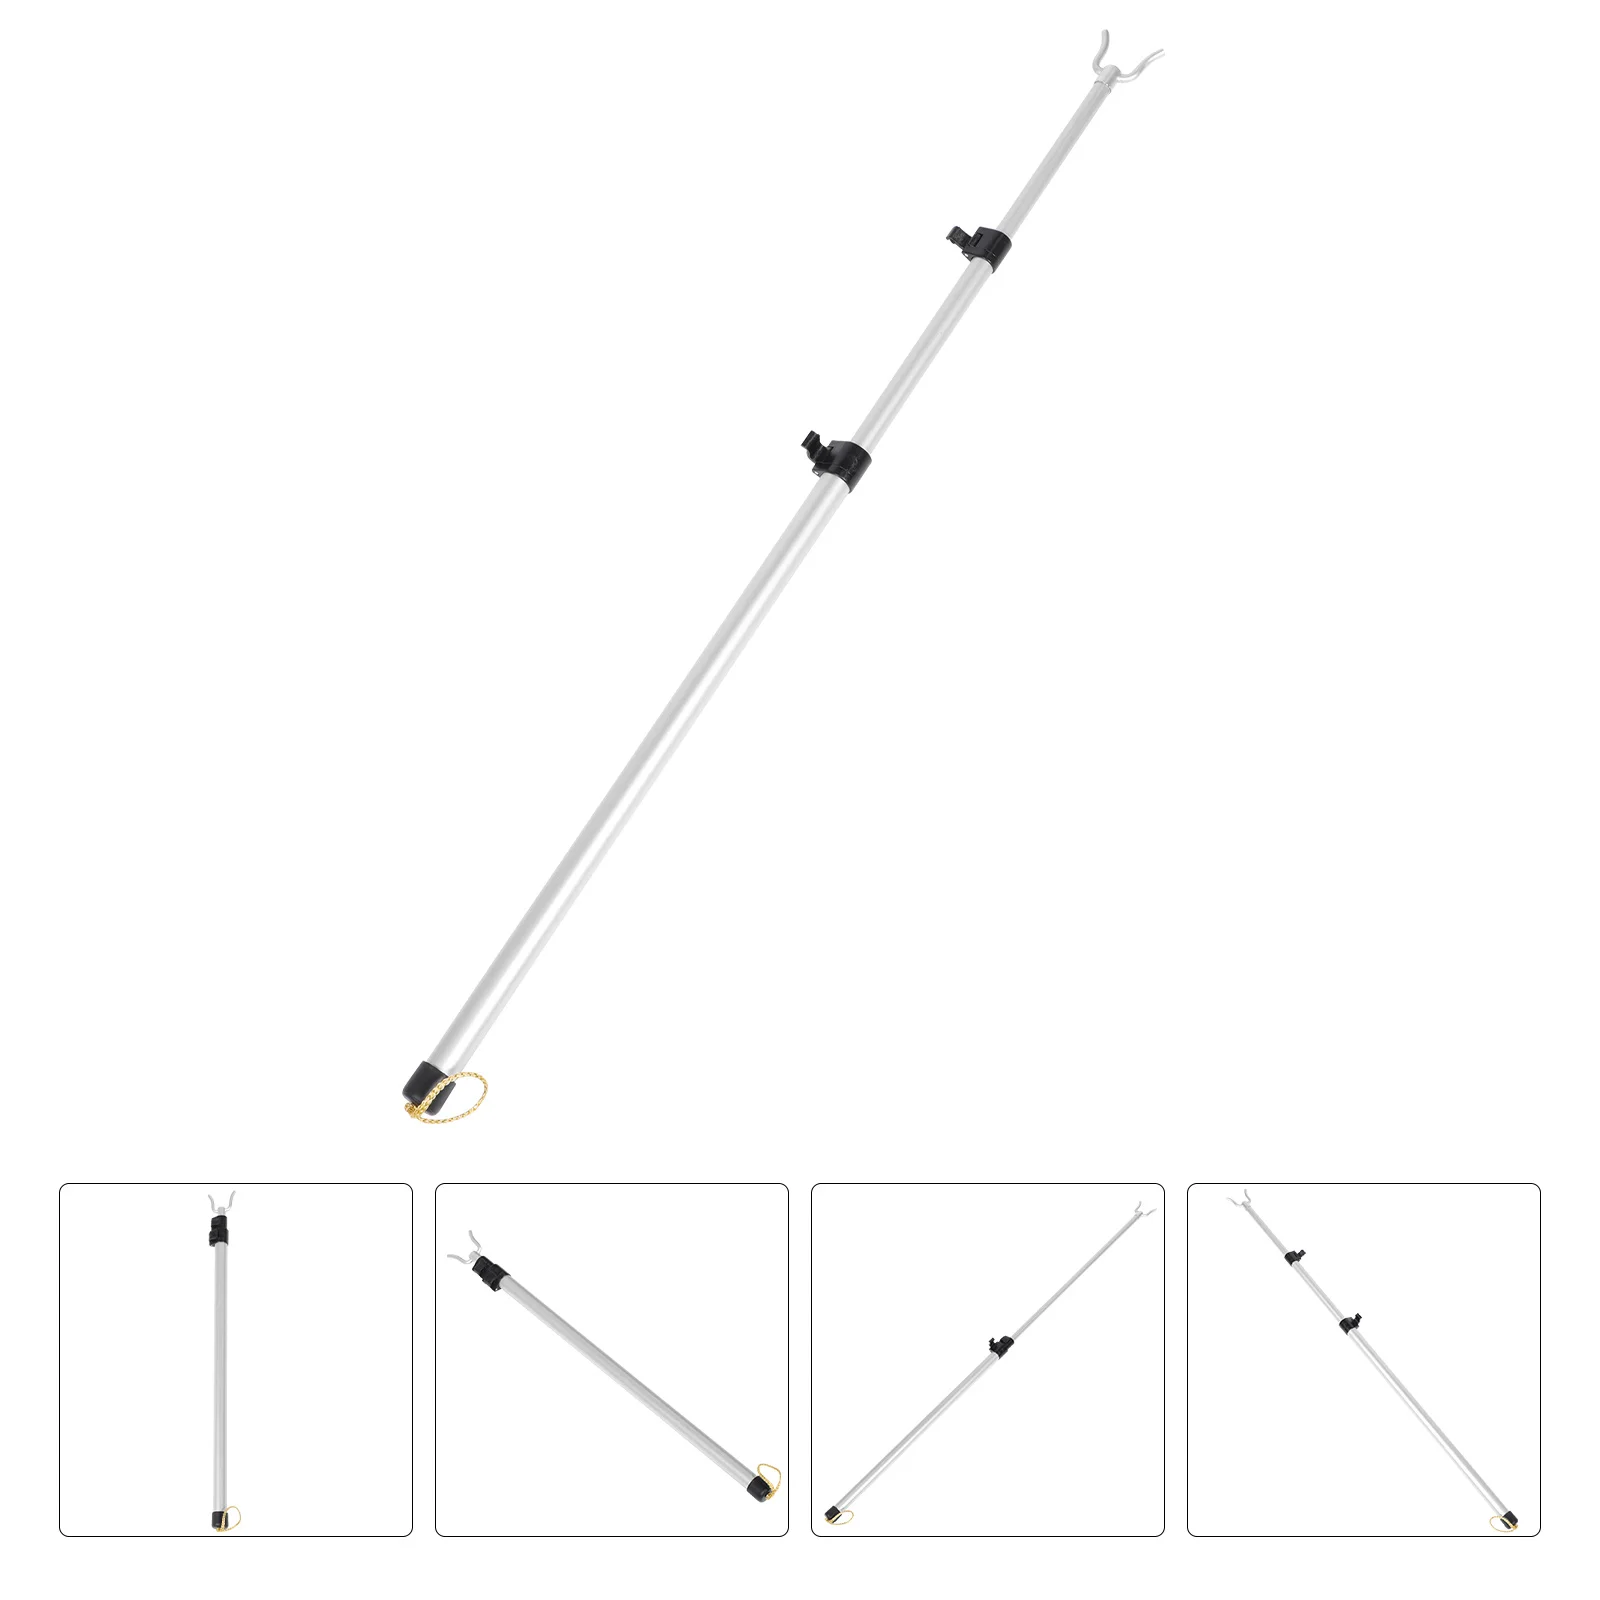 

Pole Closet Clothes Hook Rod Stick Telescoping Reach Retractable Hanger Garment Clothesline With For Reaching Clothing Poles